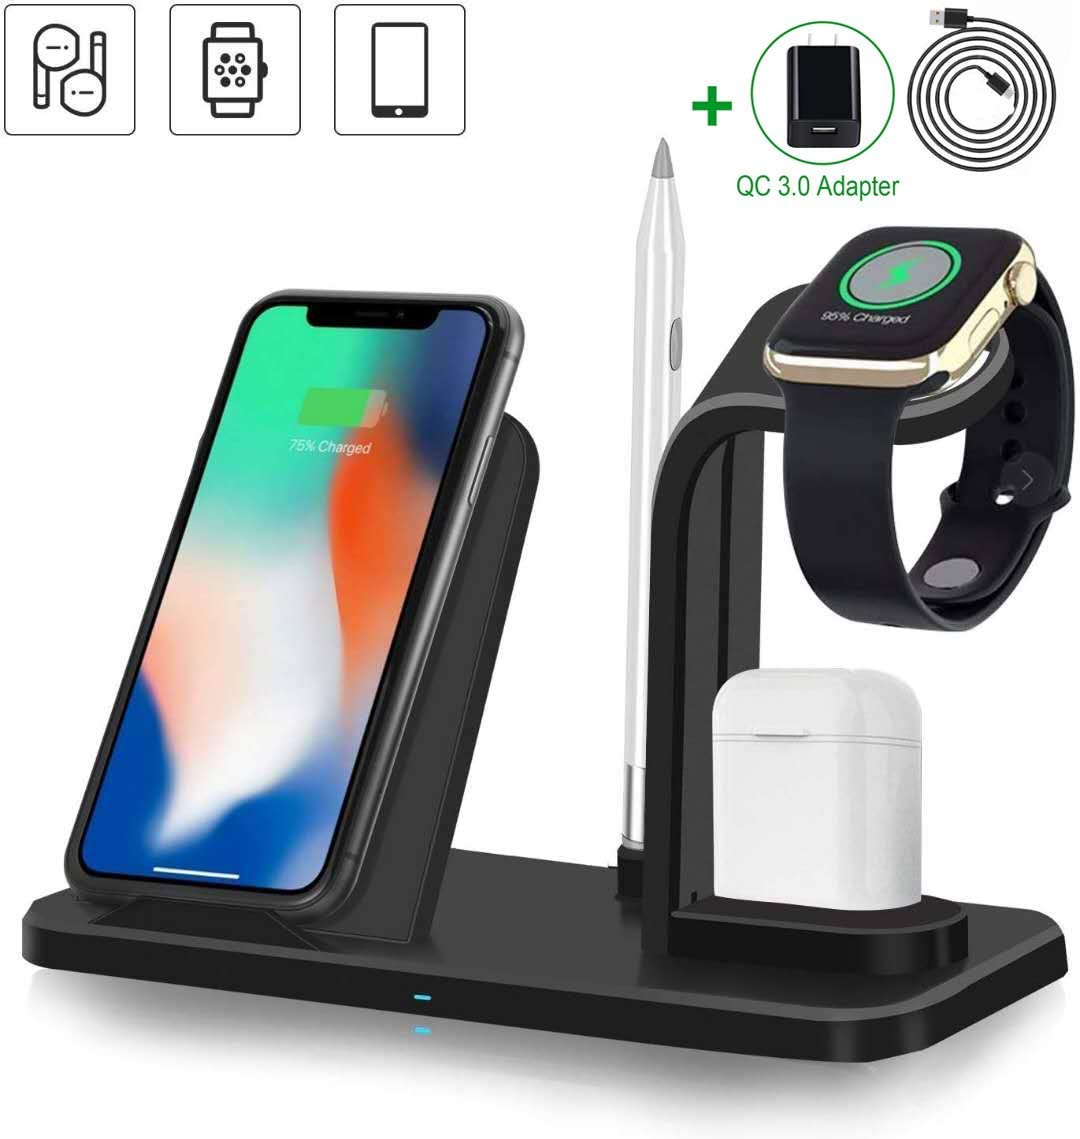 Wireless Charger, 3 in 1 Wireless Charging Station for Apple Watch and Airpods, Fast Wireless Charging Stand Compatible with iPhone 11/11 Pro Max/Xs/XR/X/8/8 Plus(with QC 3.0 Adapter), $32 @amazon.com